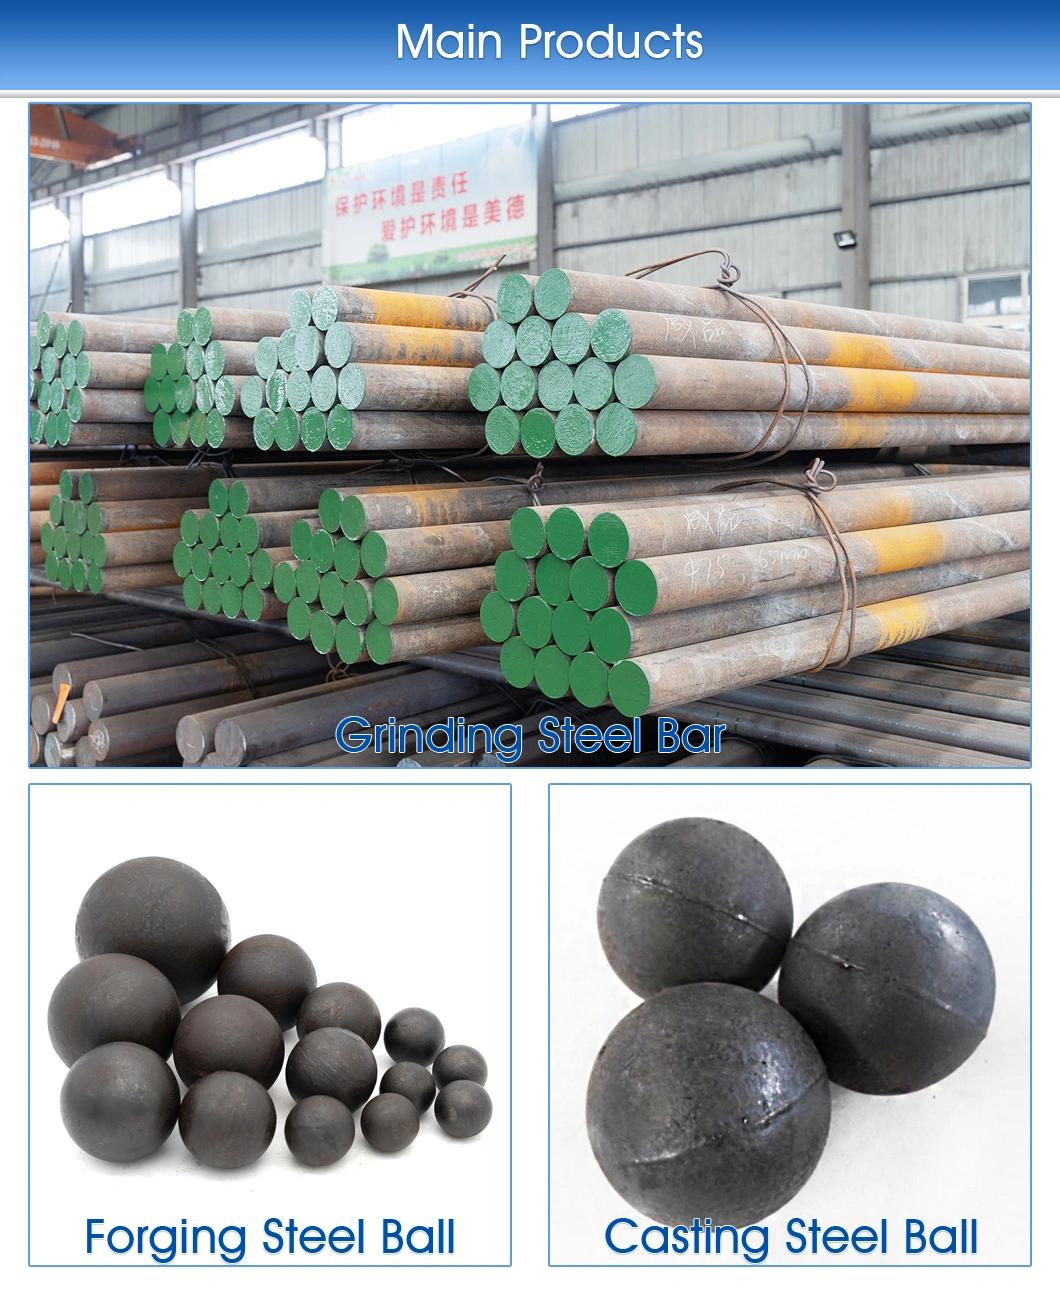 High Quality China Factory Customized Design Forged Steel Grinding Ball for Milling and Grinding